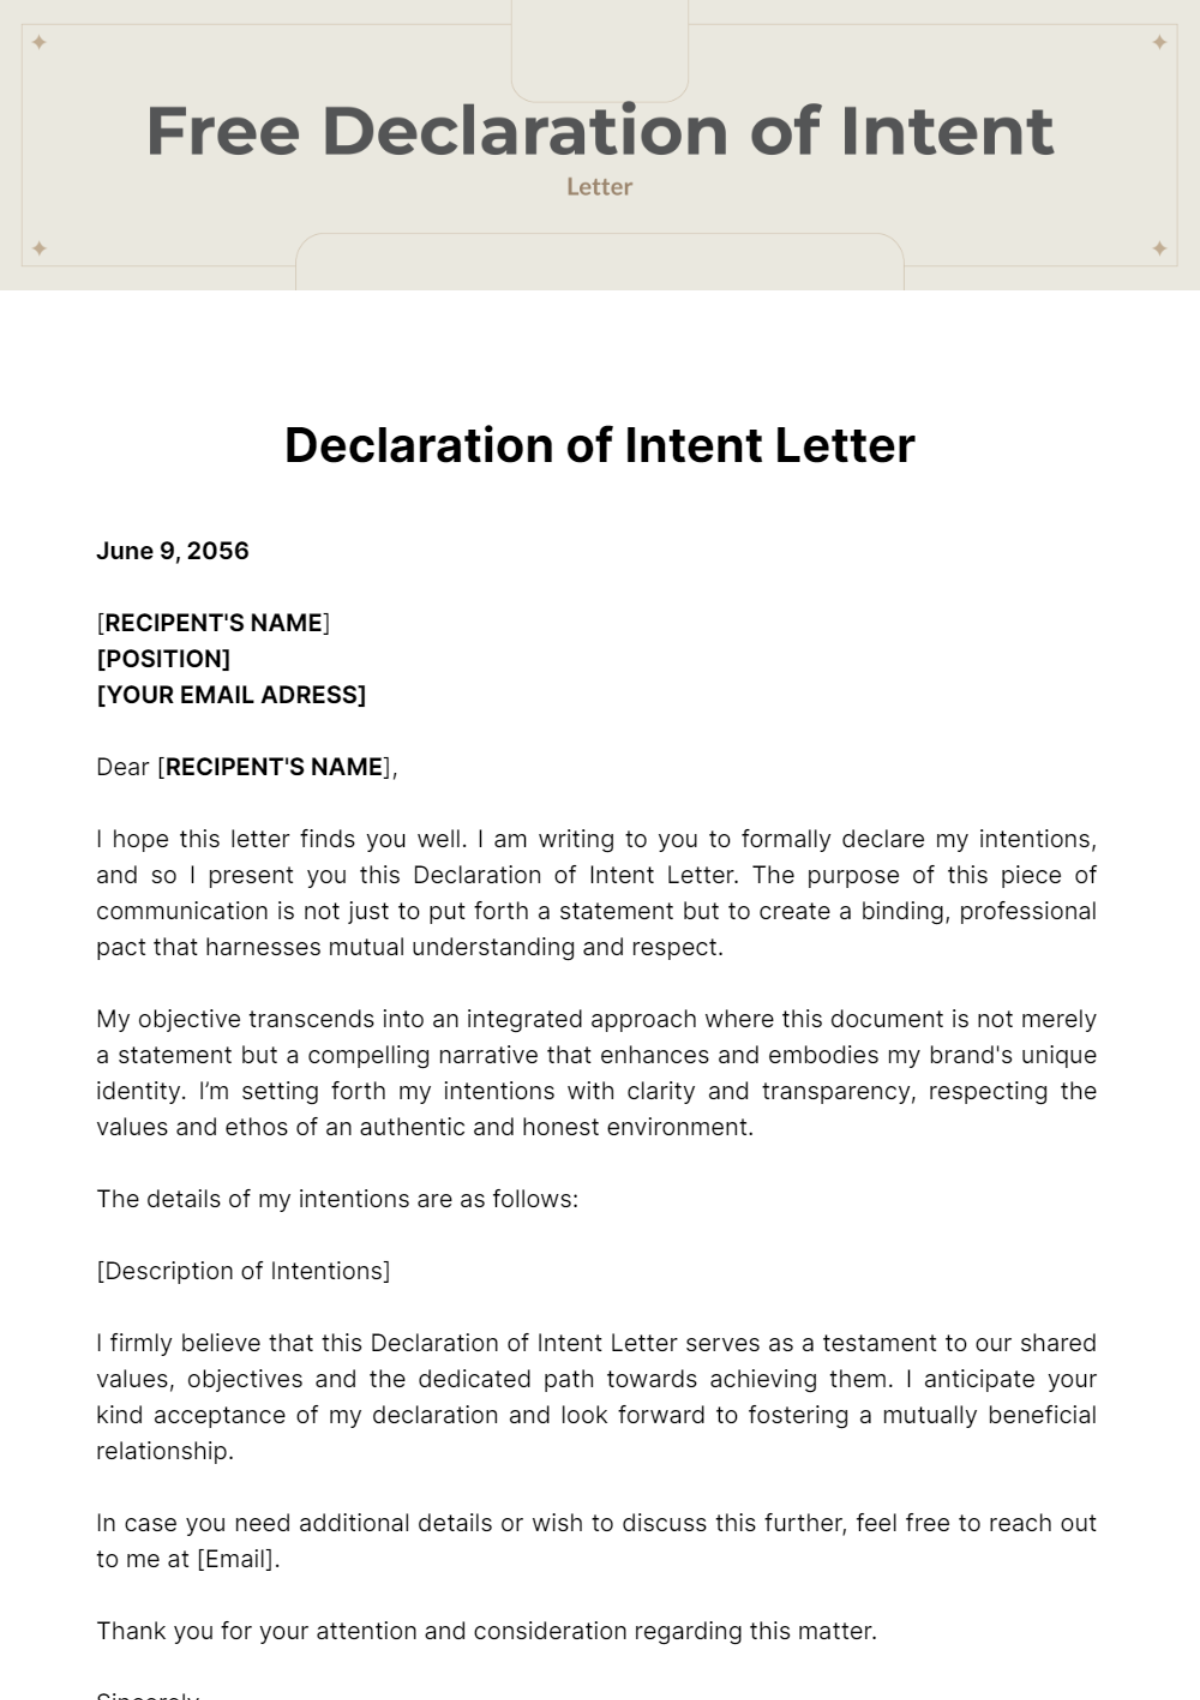 Declaration of Intent Letter Template